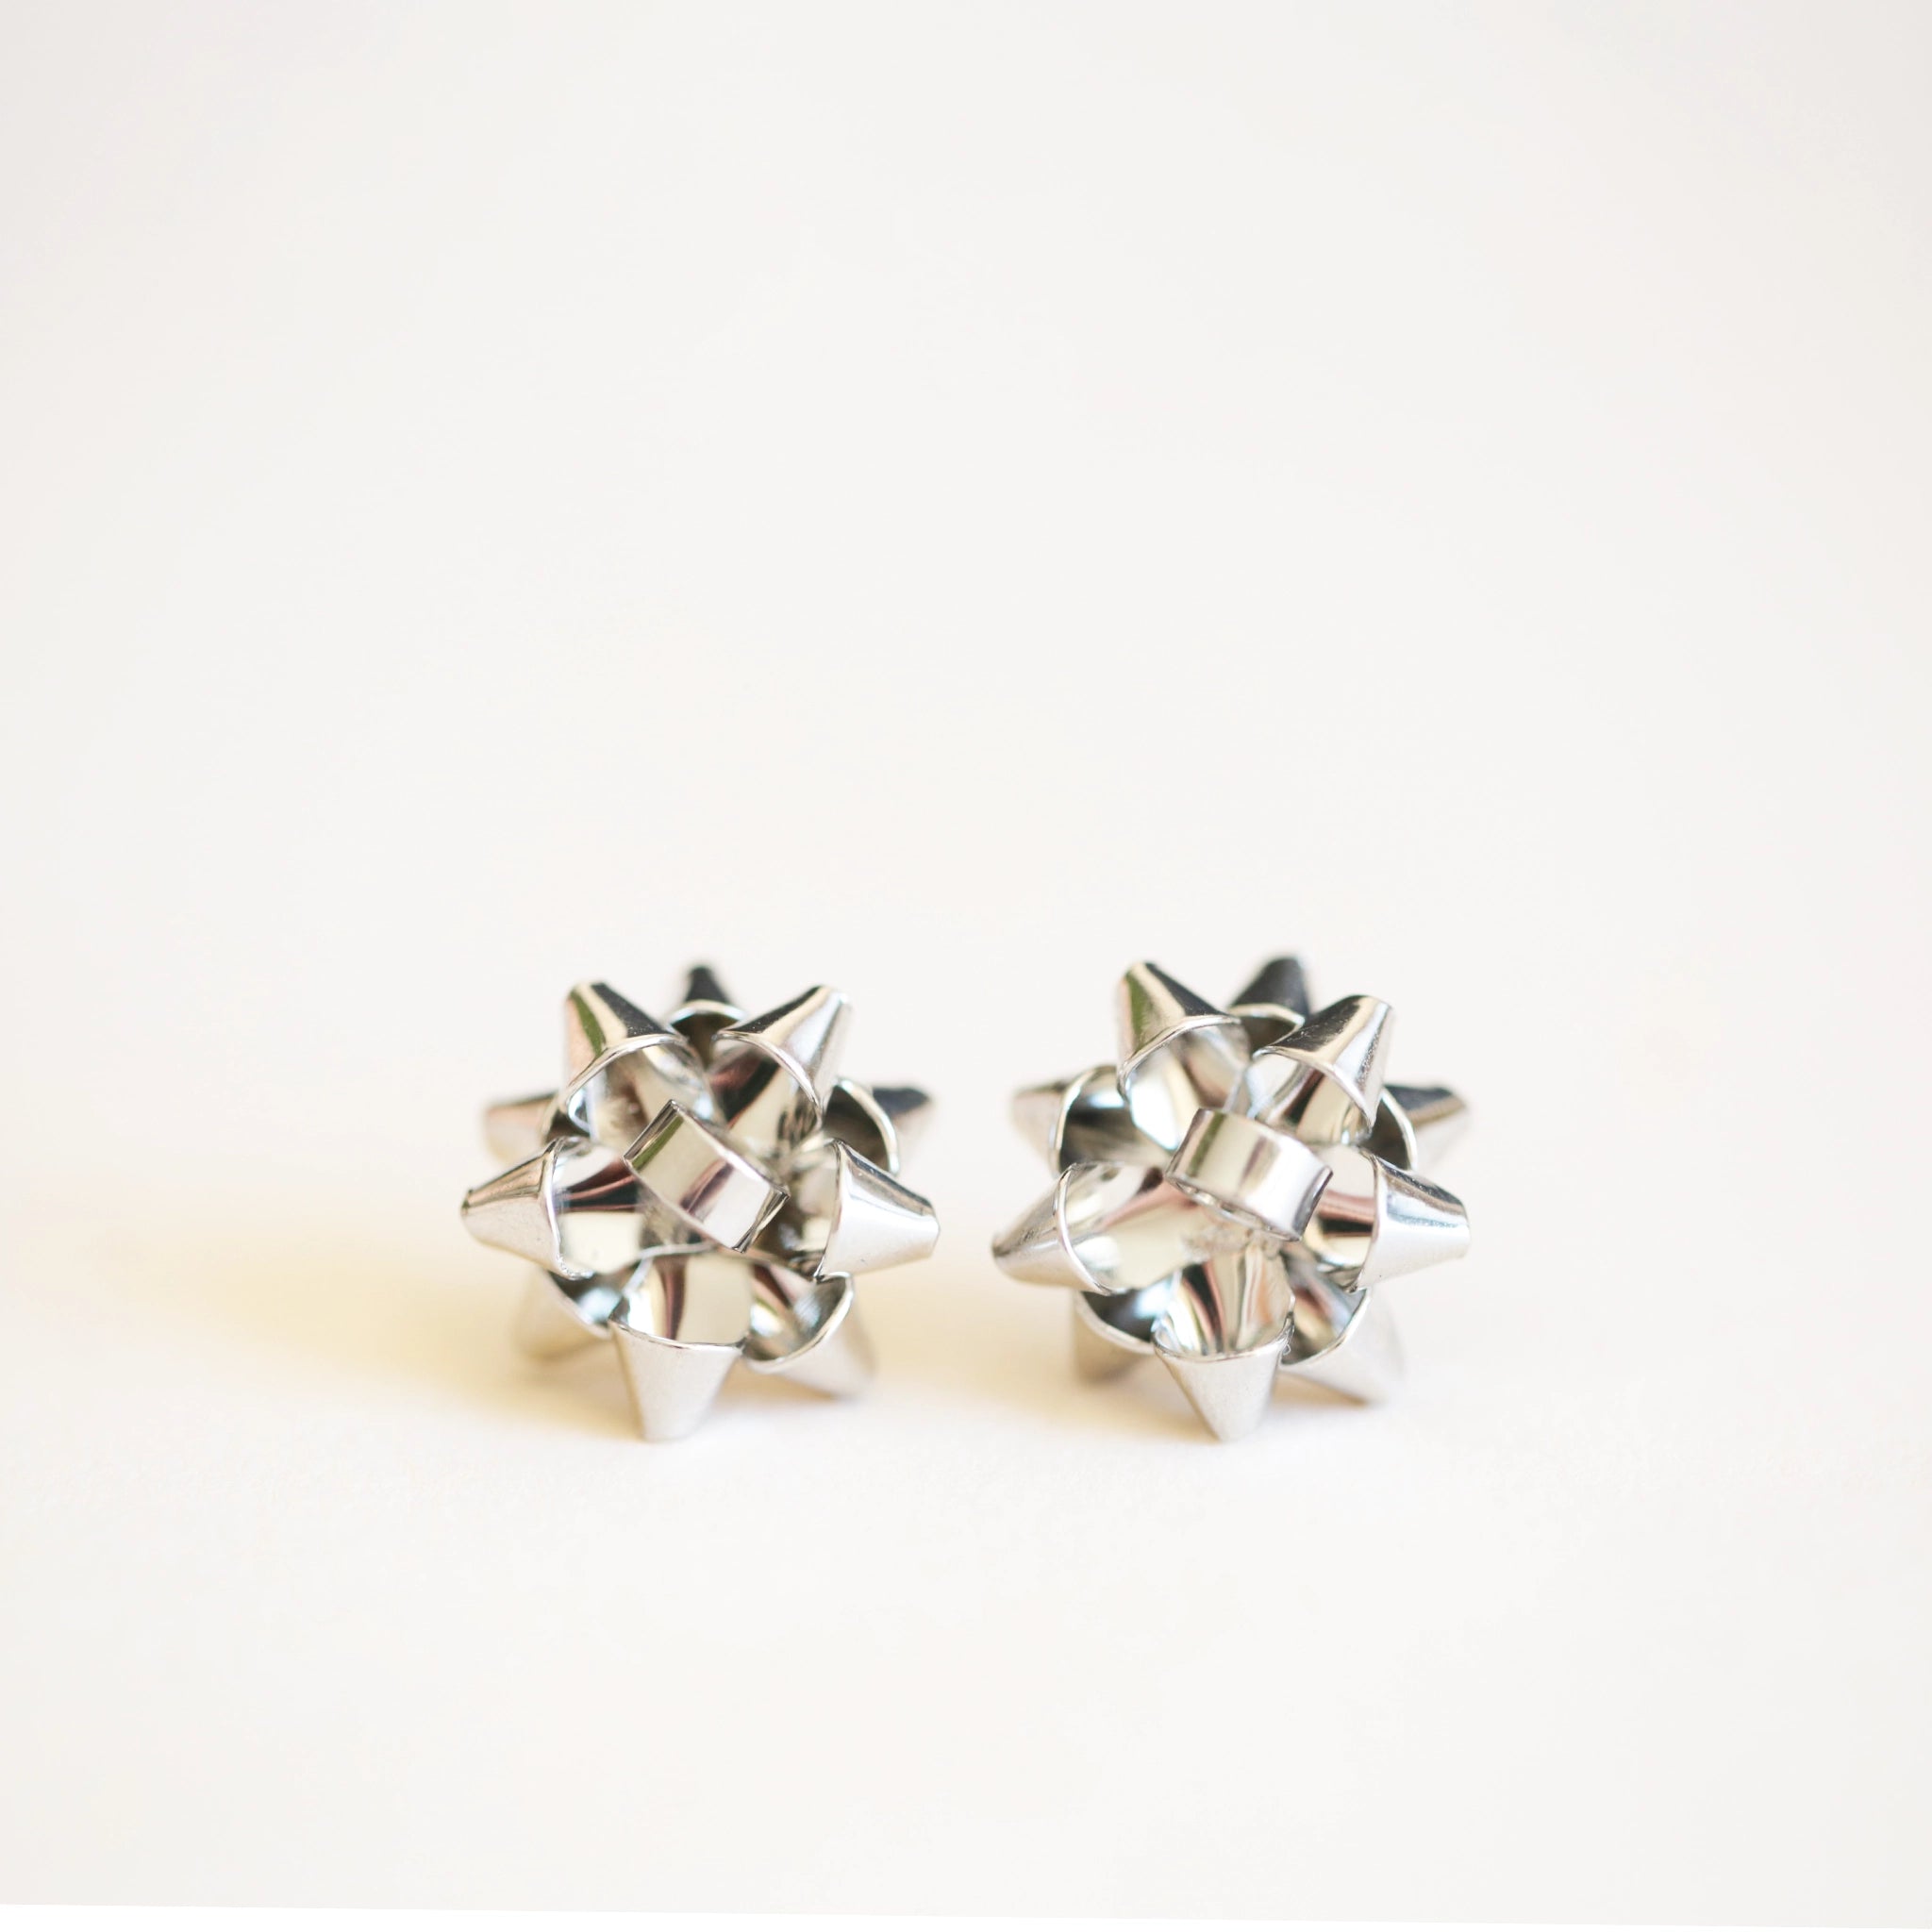 On an ivory background is a pair of silver earrings in the shape of holiday bows.